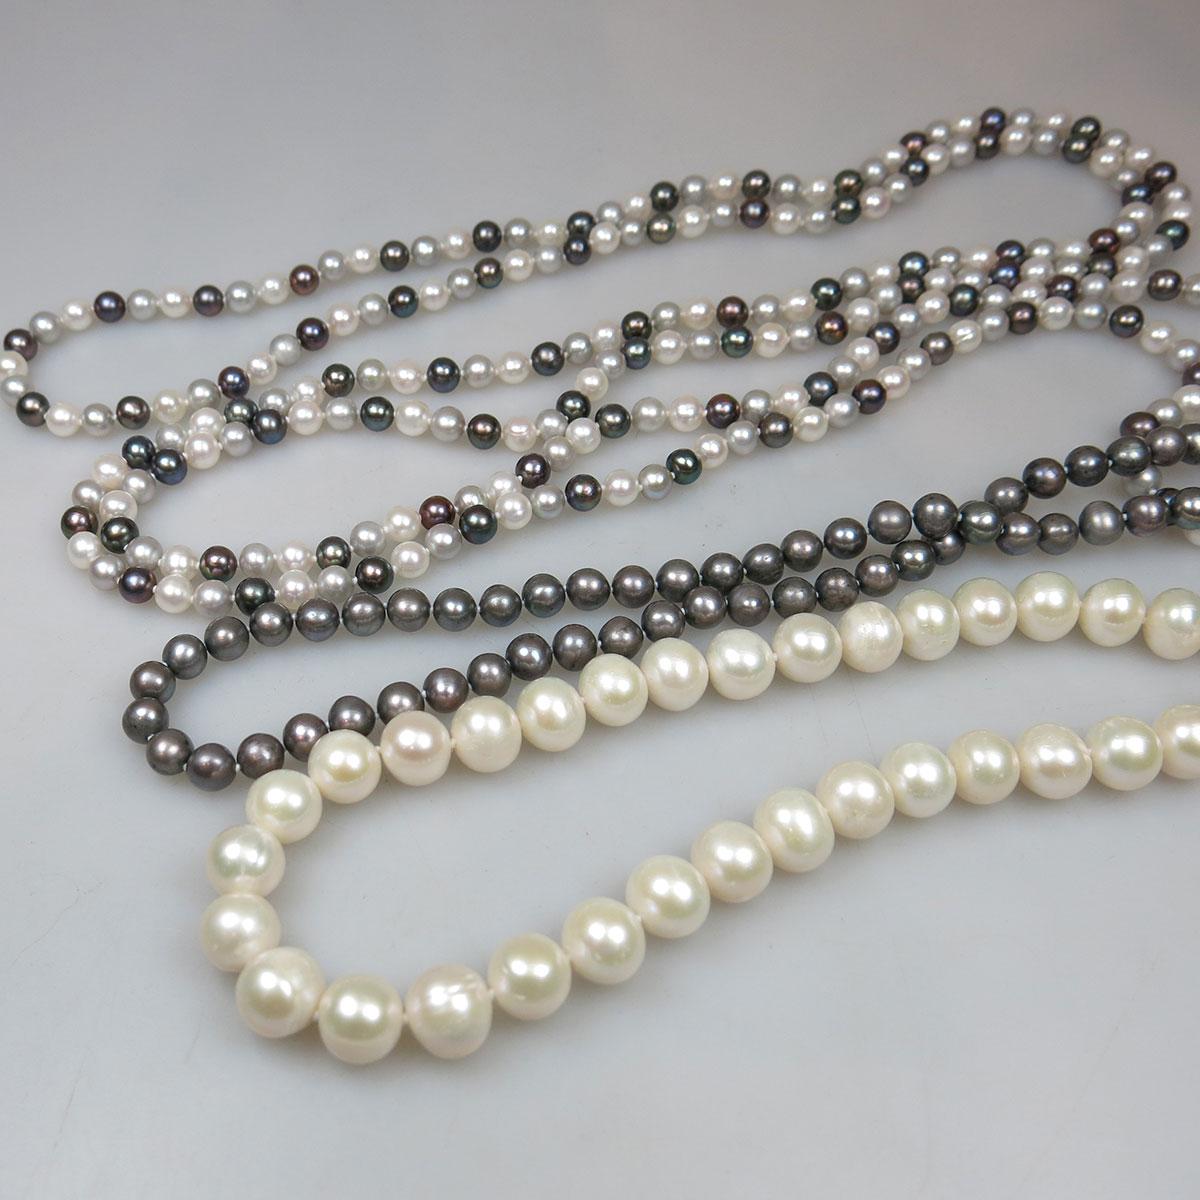 Three Various White And Grey Freshwater Pearl Necklaces